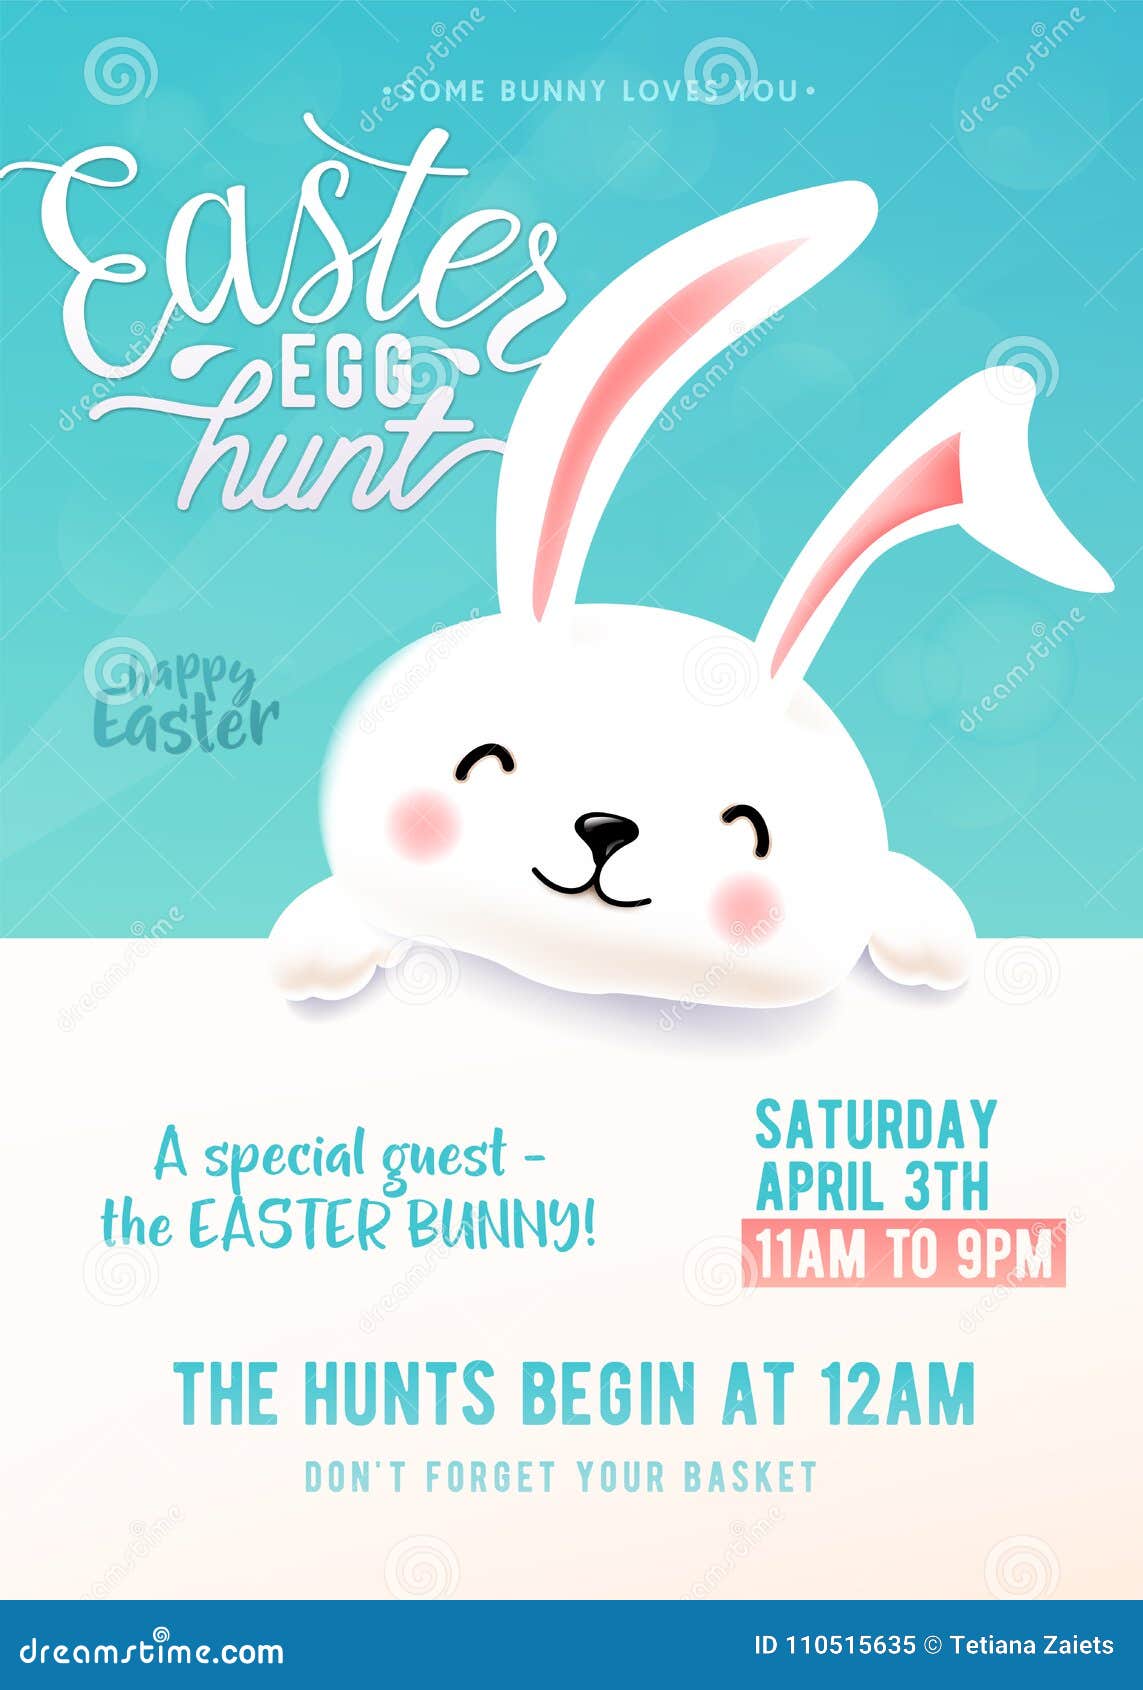 cute party poster for easter egg hunt with funny easter bunny